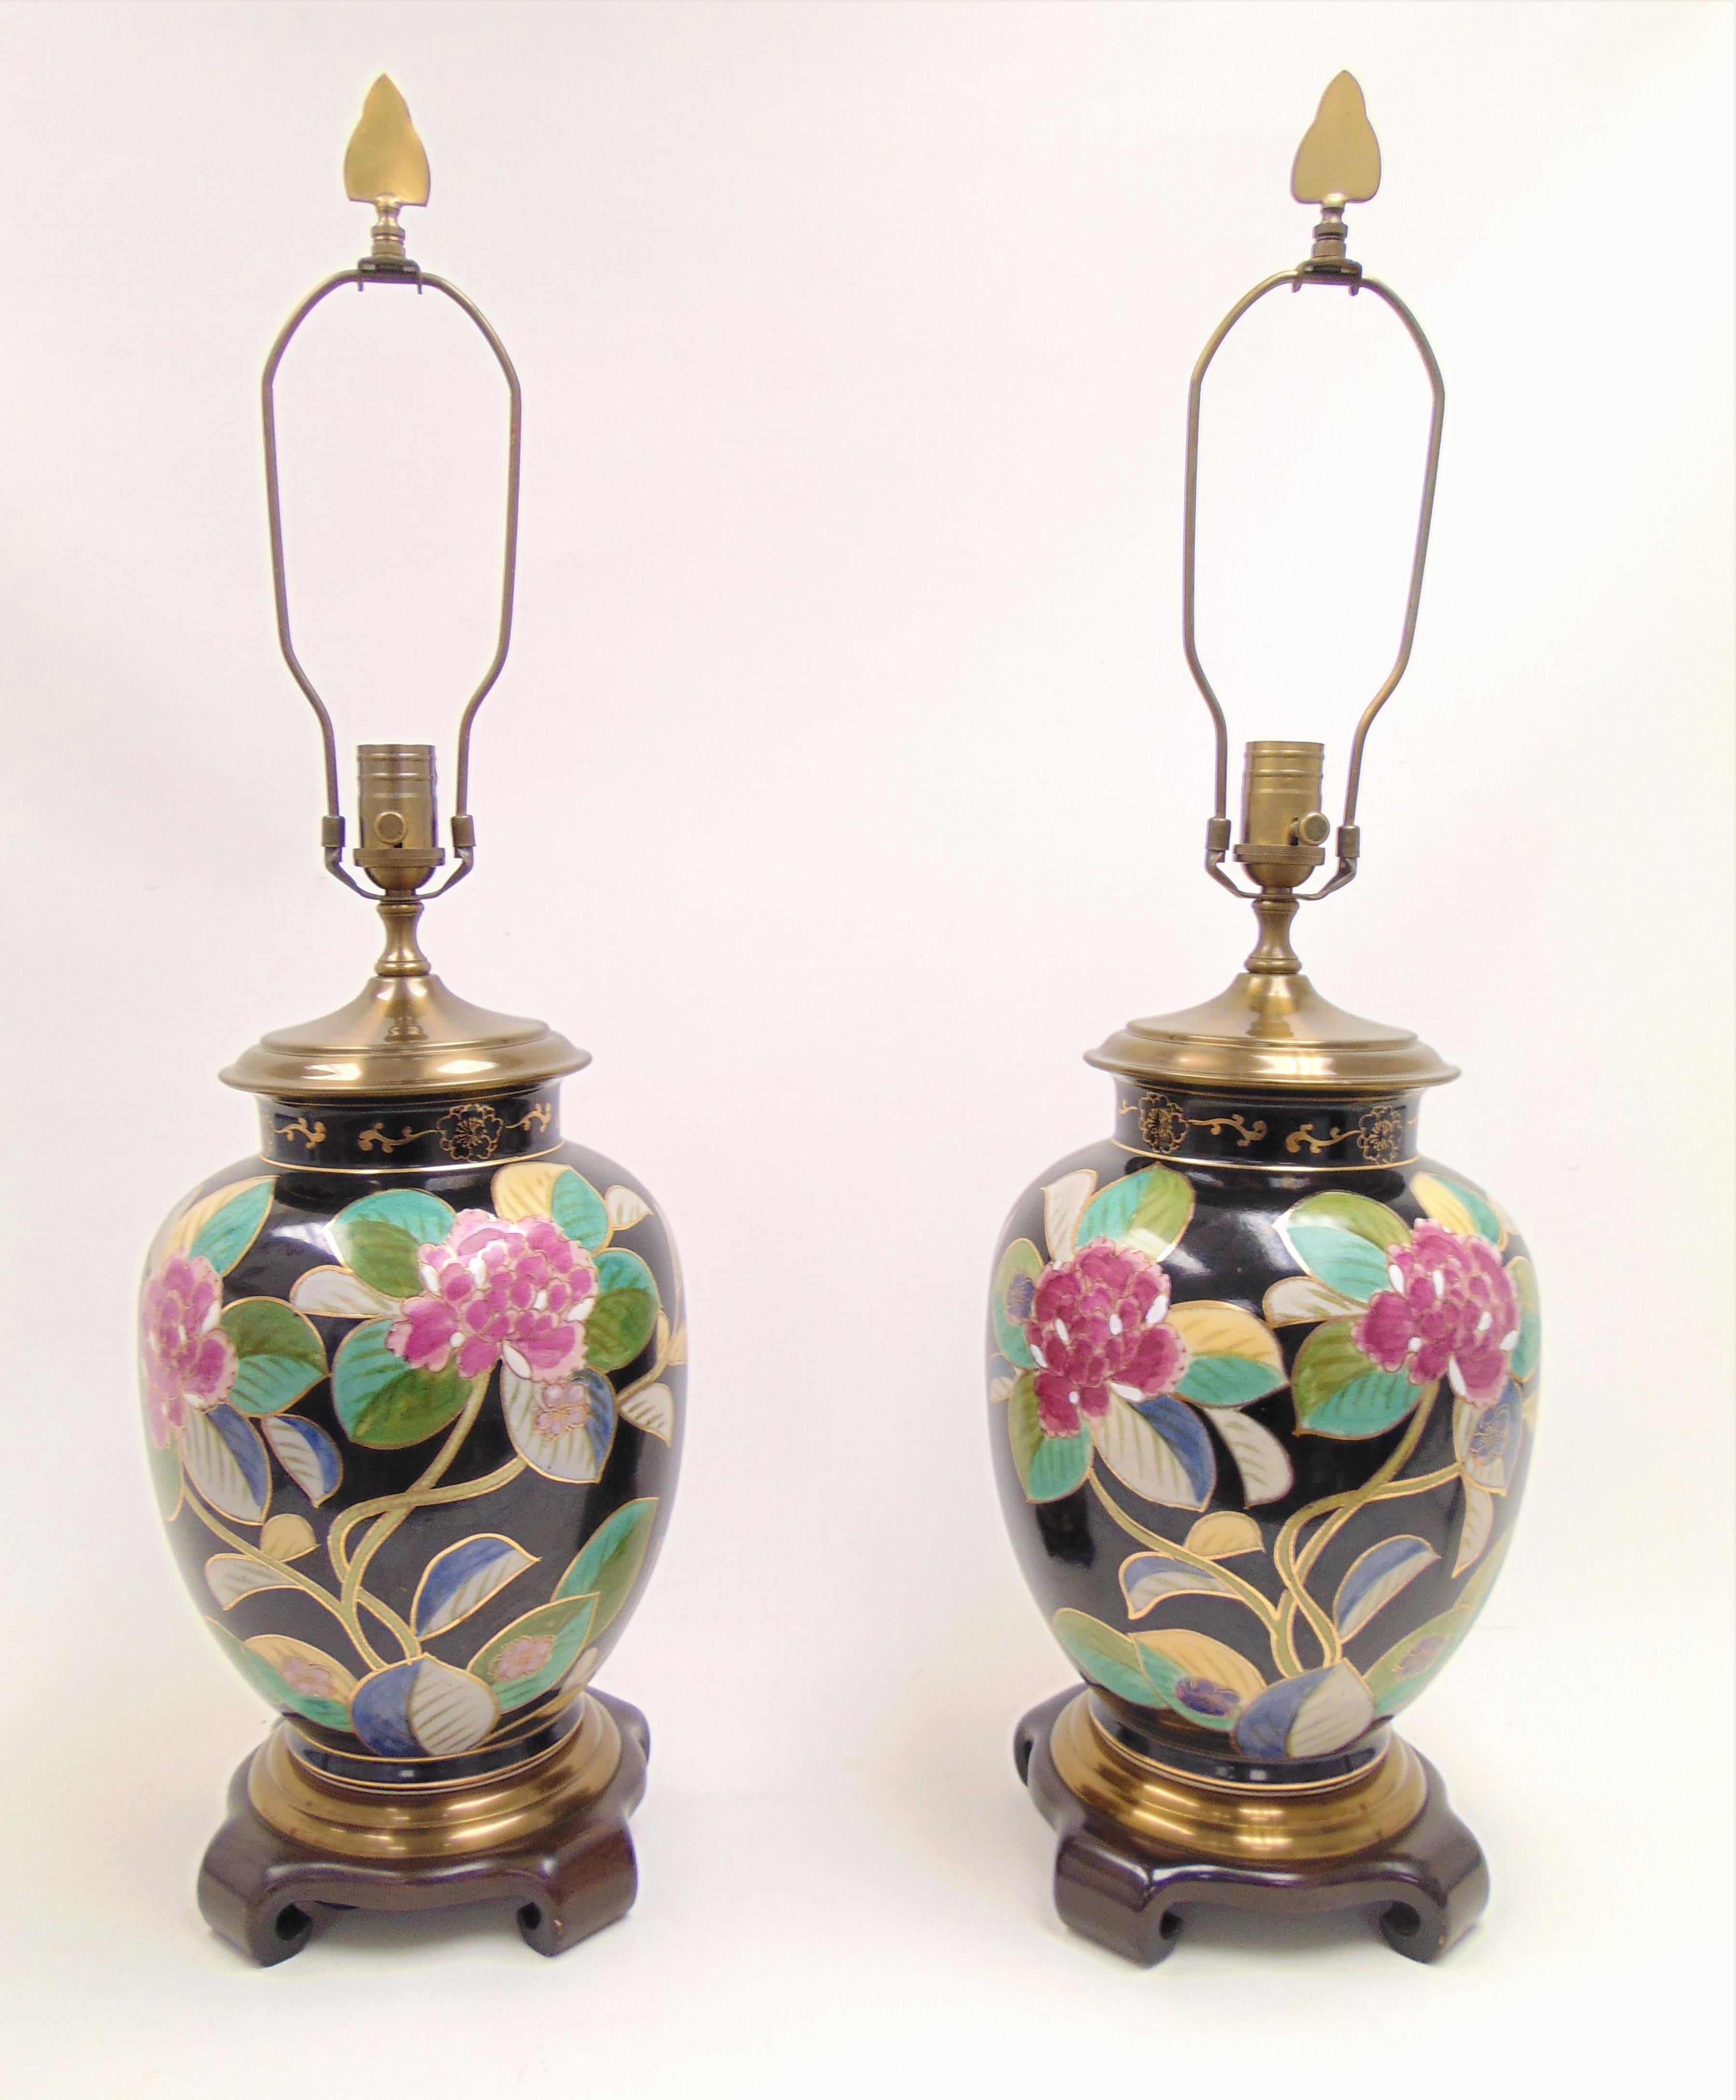 These are a beautiful pair of ceramic lamps from the 1980s by Wildwood Lamps. The flowers are hand painted with gold accents and set in a crackle glaze finish. The lamps sit atop wooden bases with scroll.